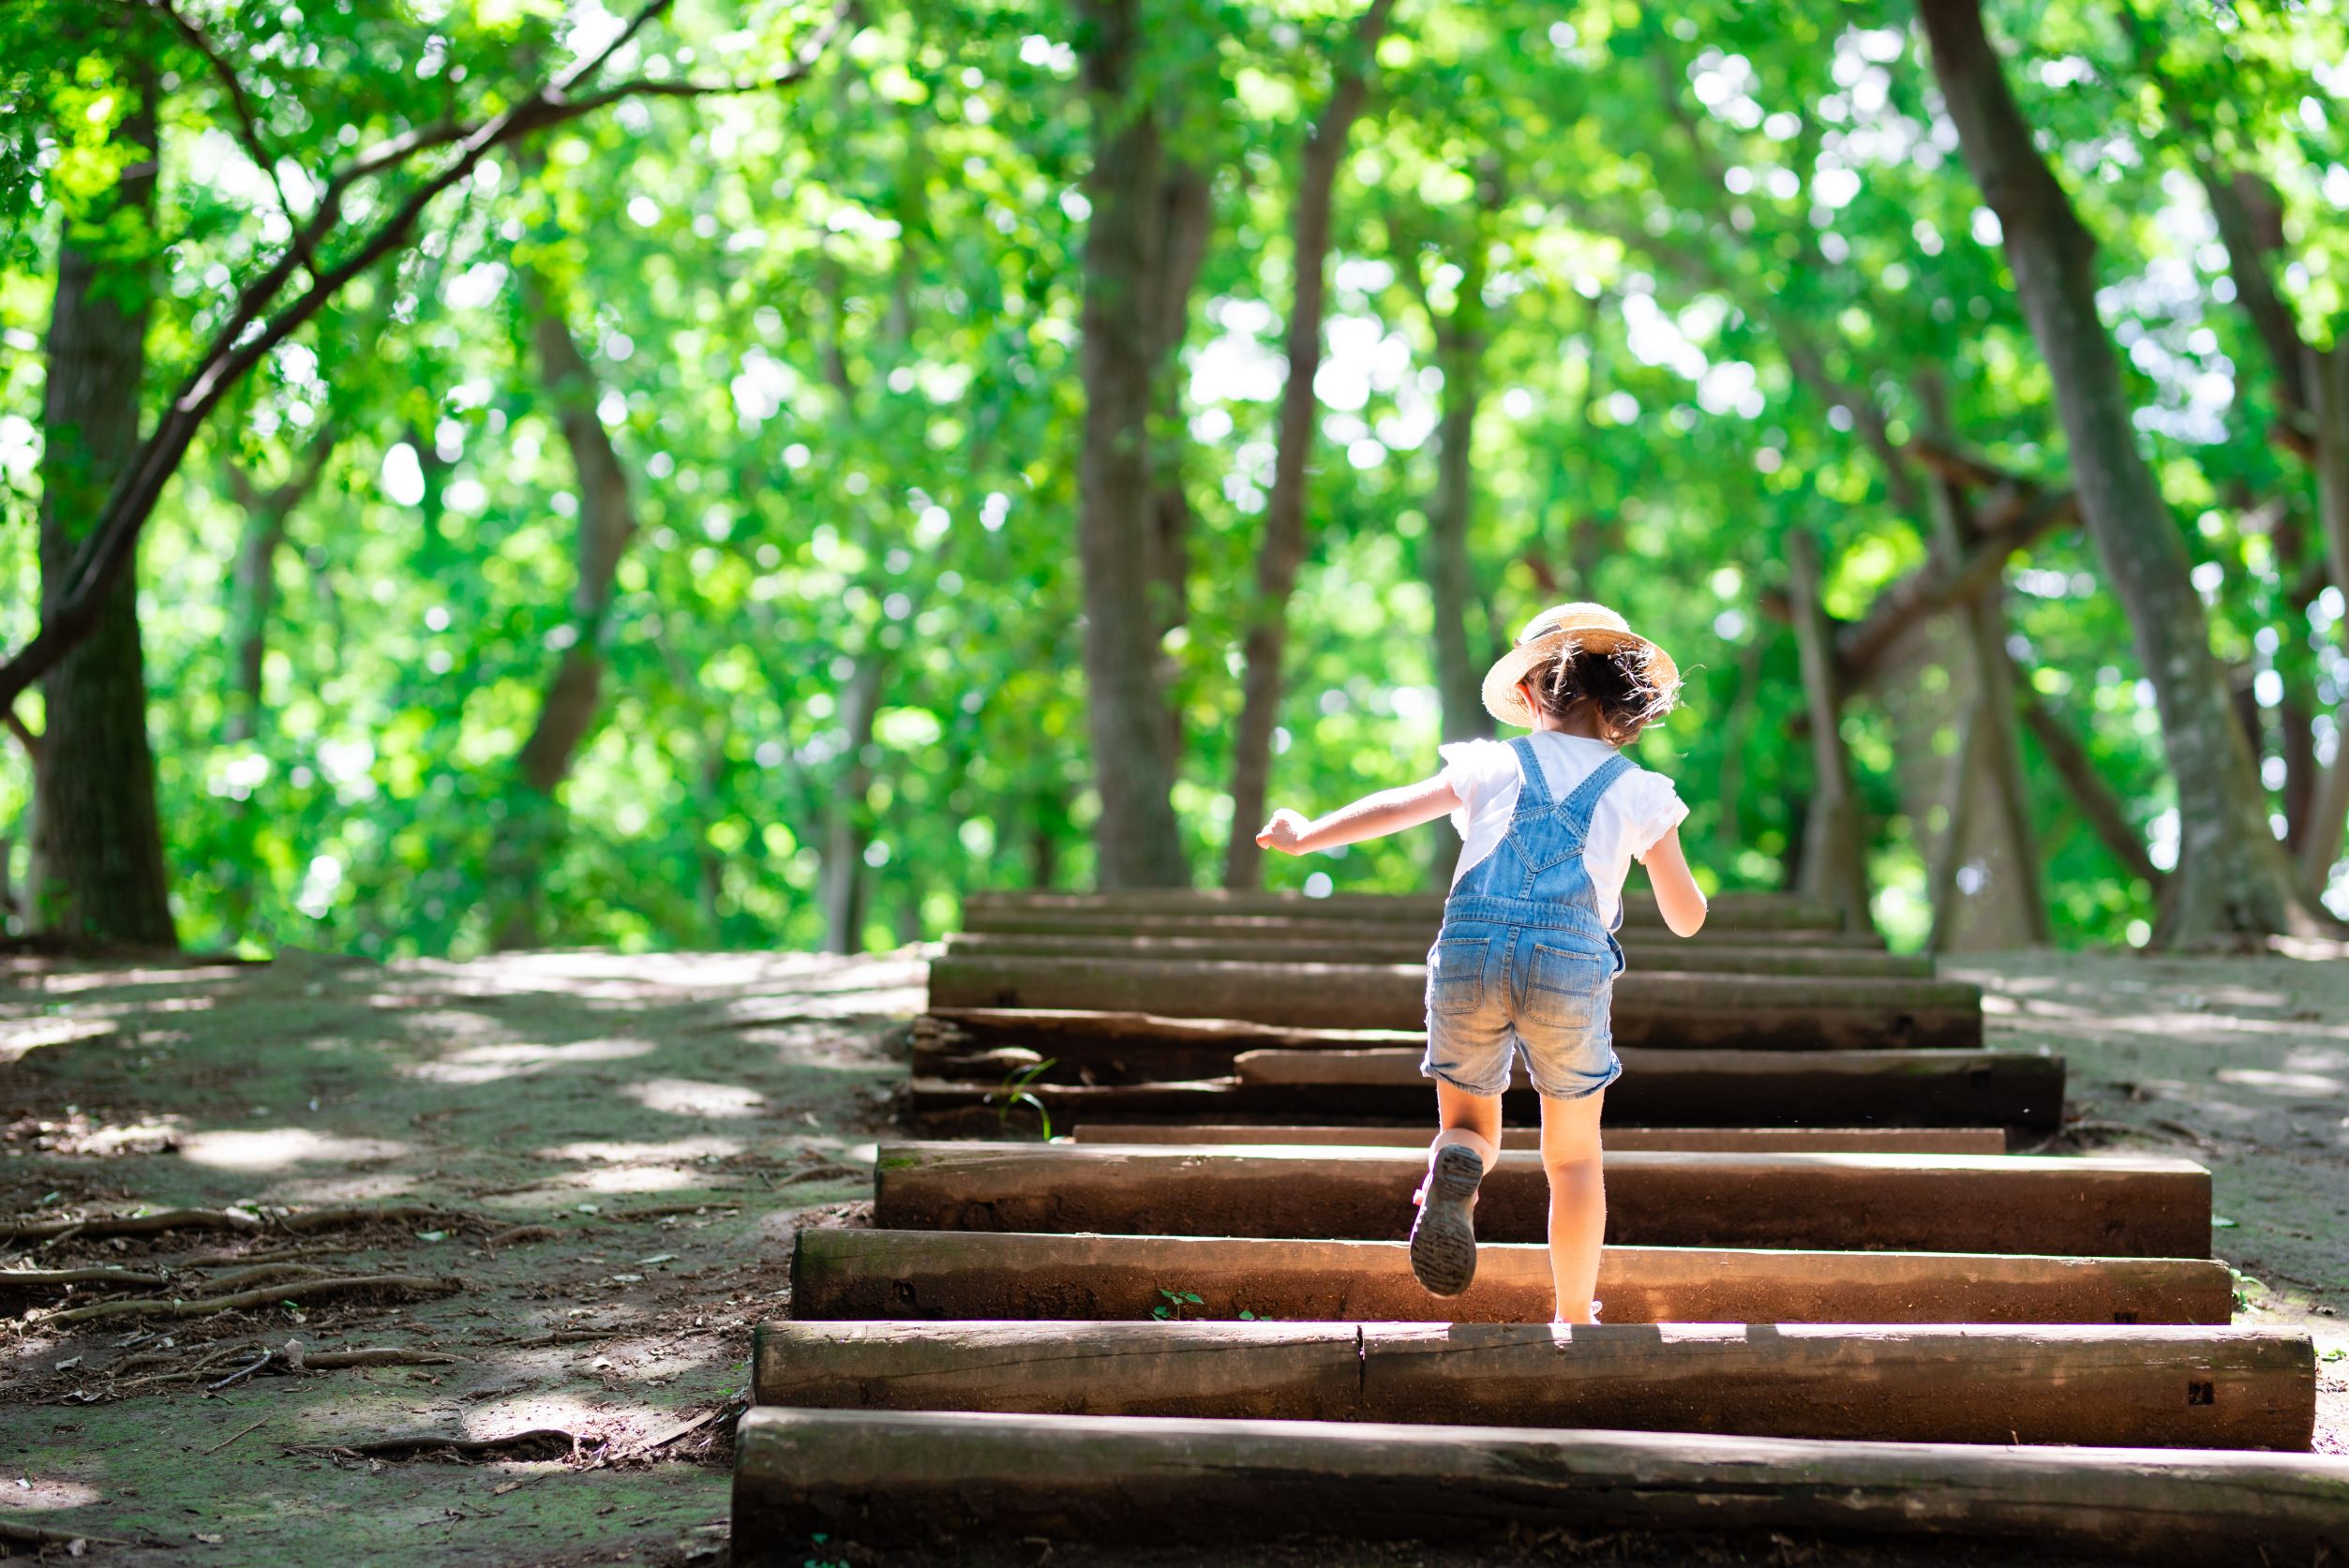 A child runs up stairs in the woods